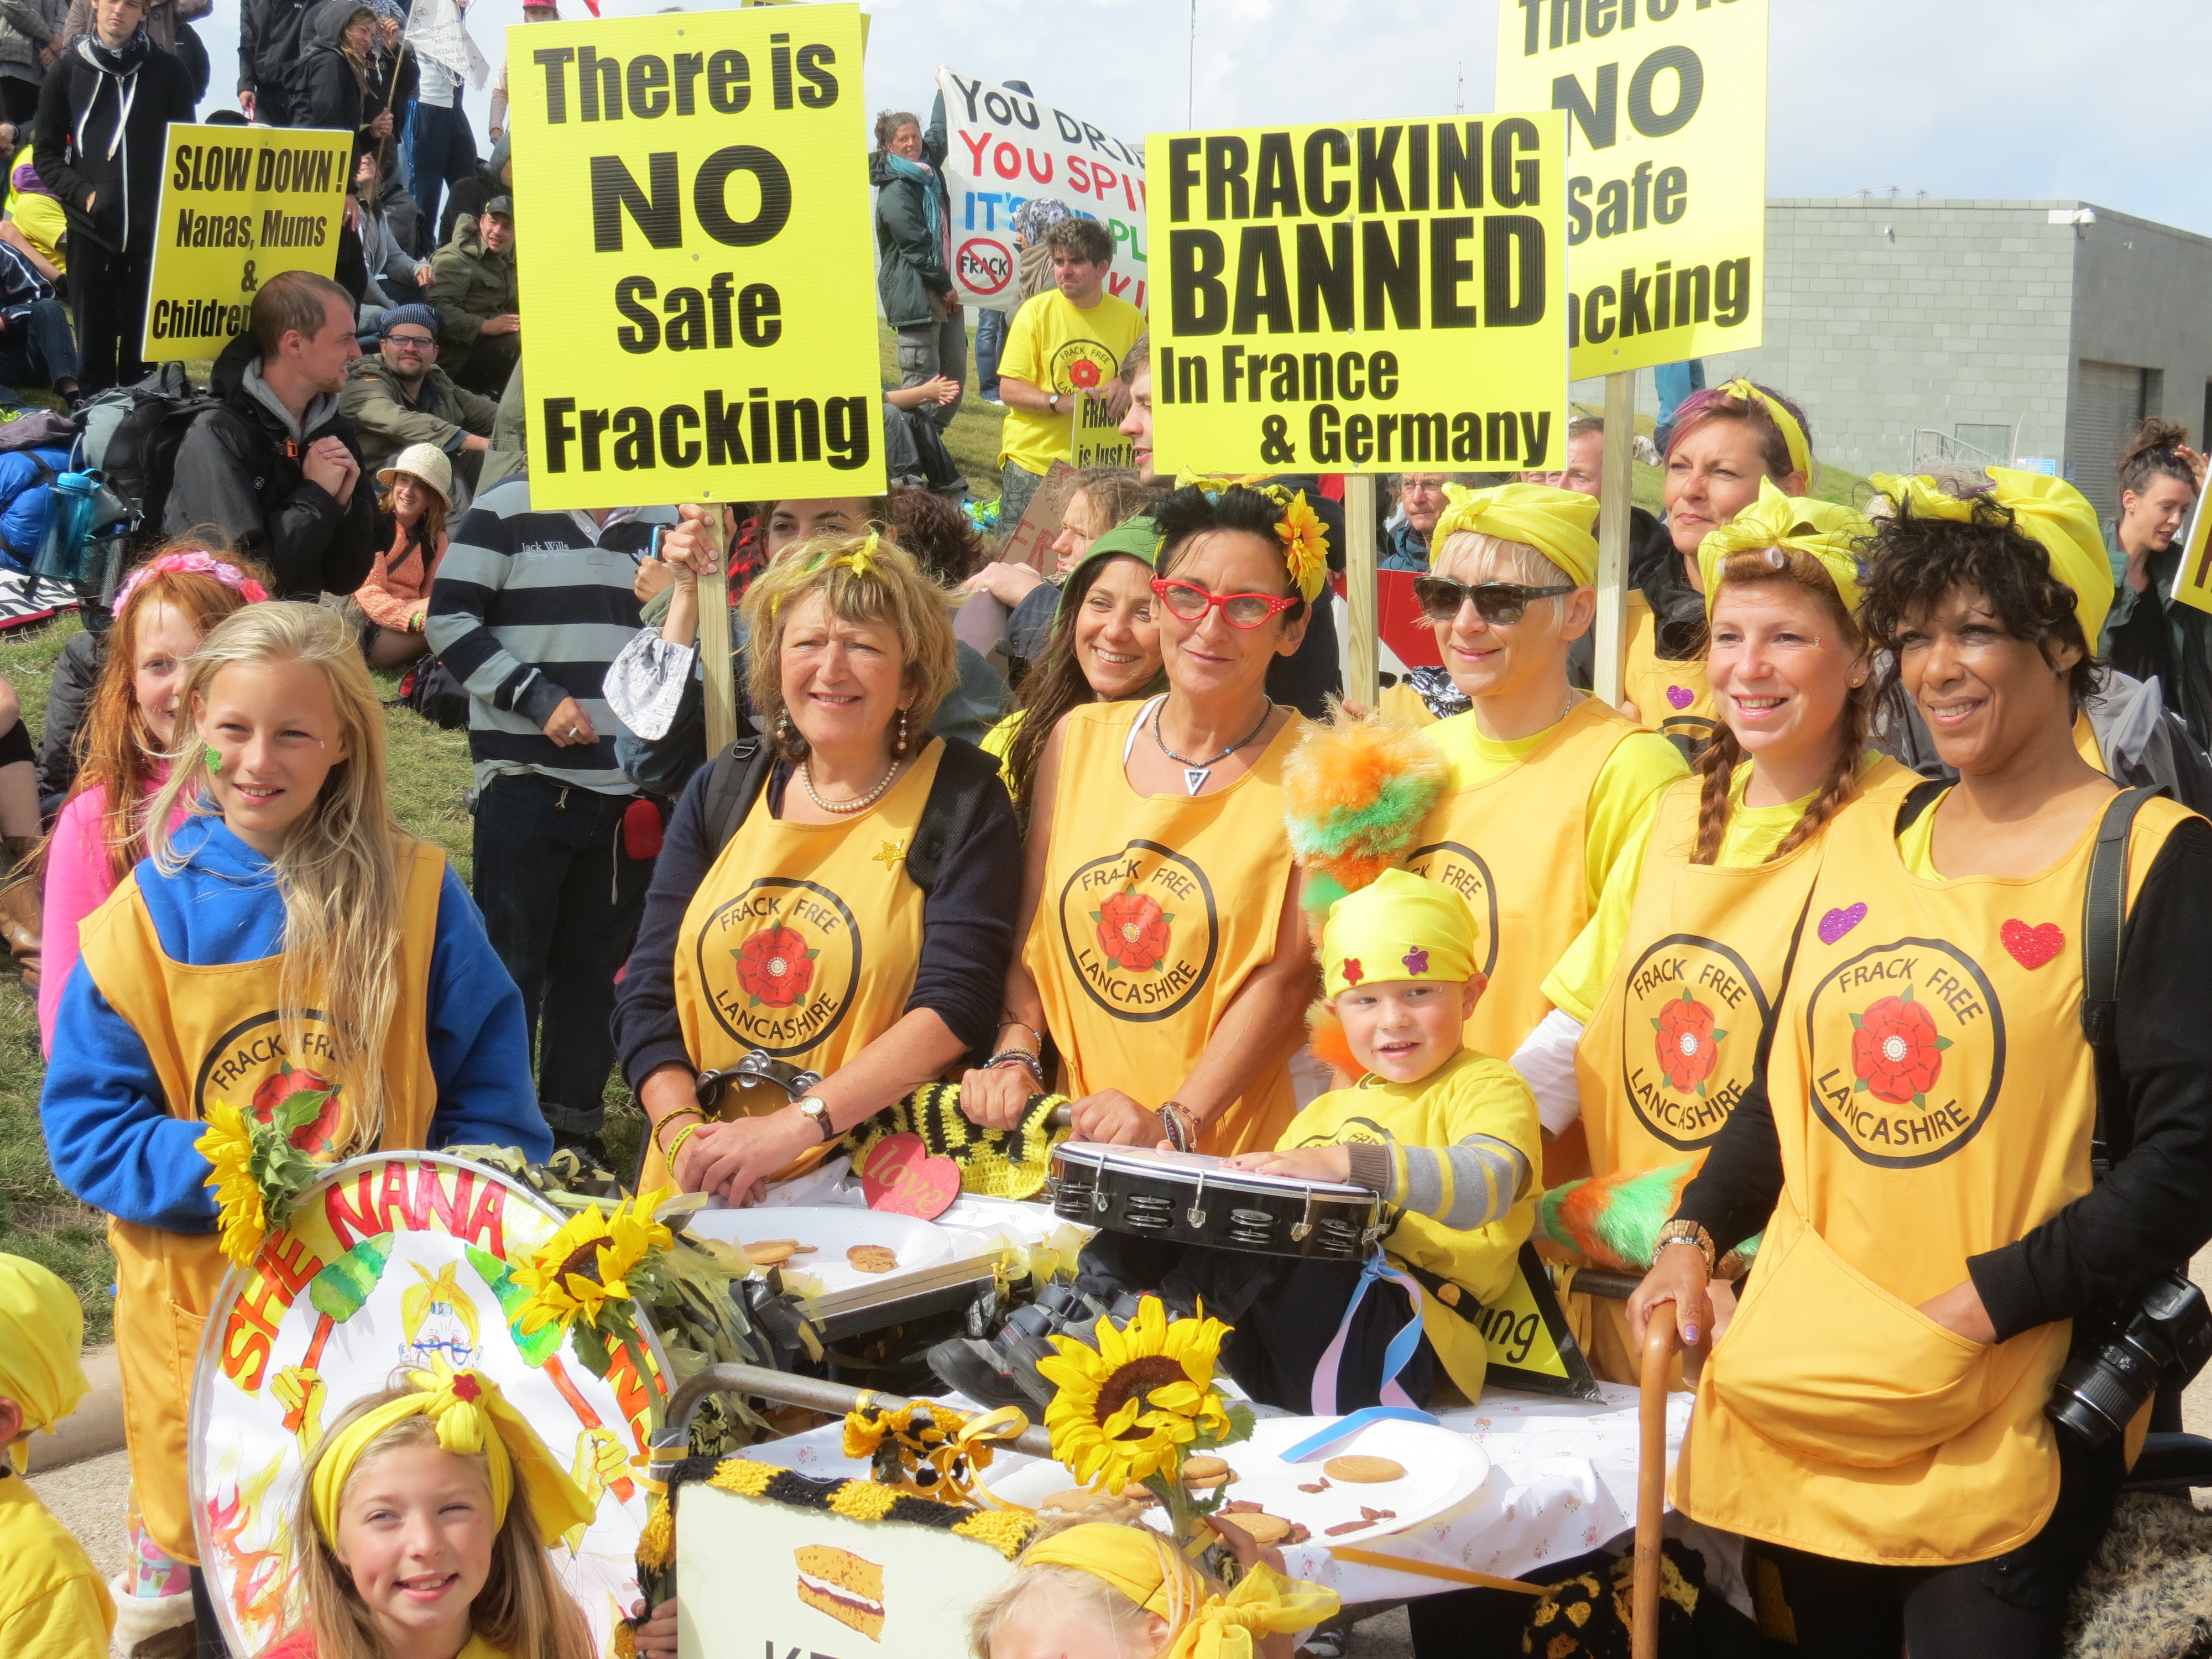 Anti-fracking campaigners in Lancashire